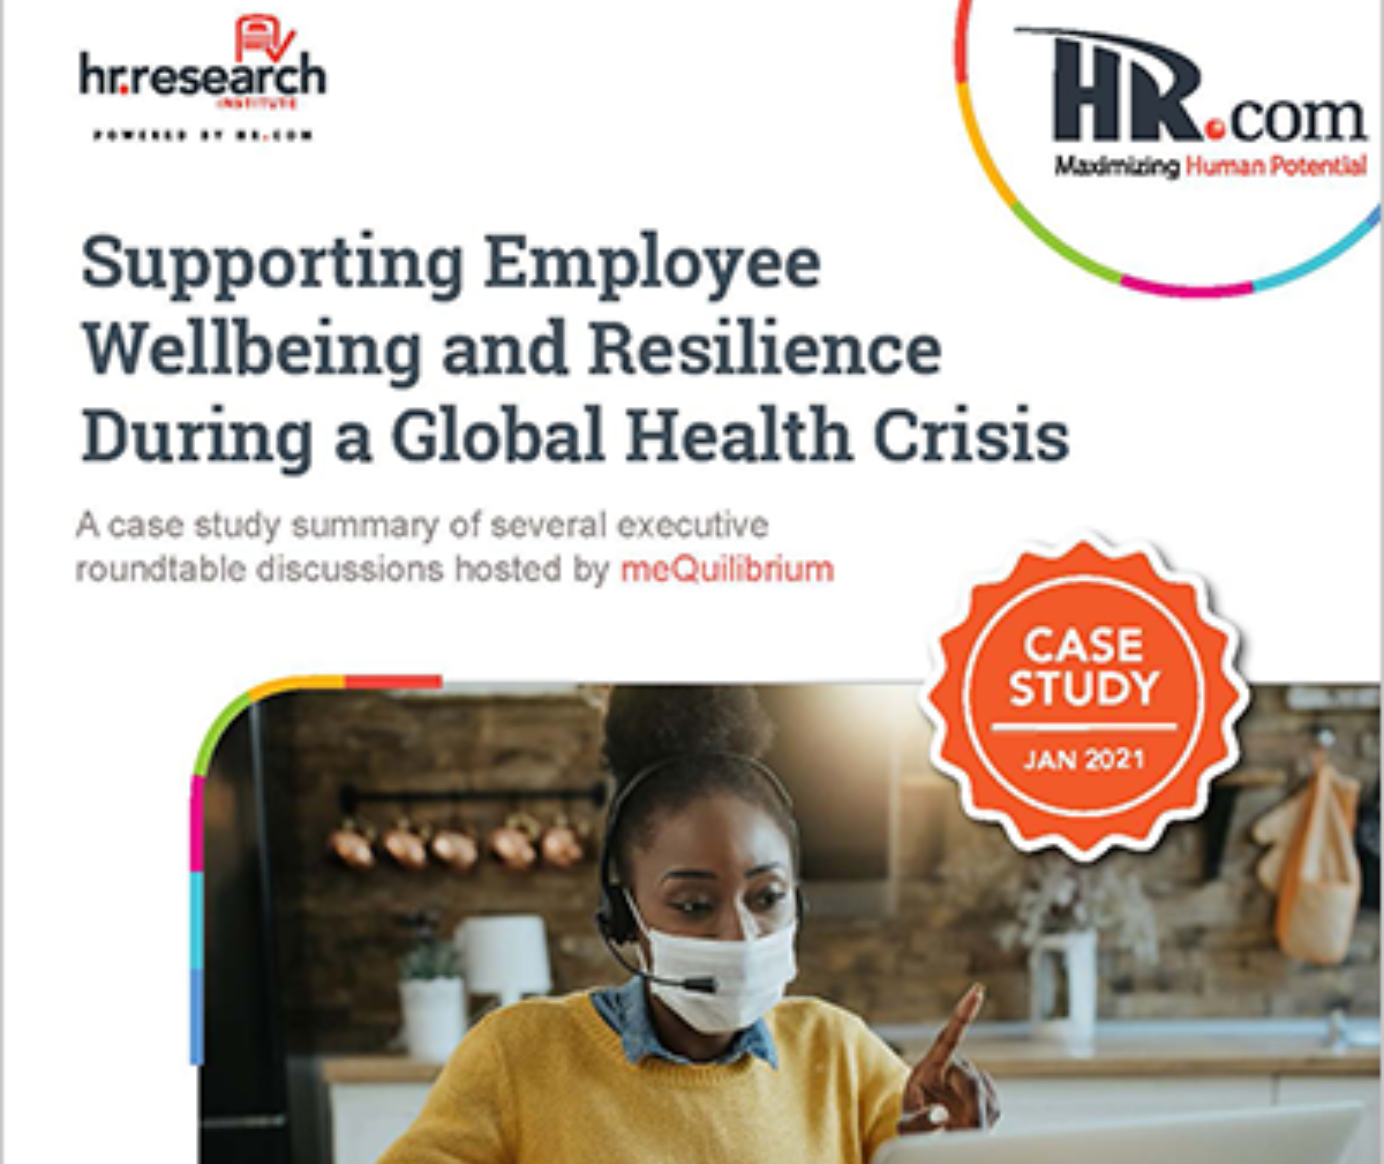 Supporting Employee Wellbeing and Resilience During a Global Crisis